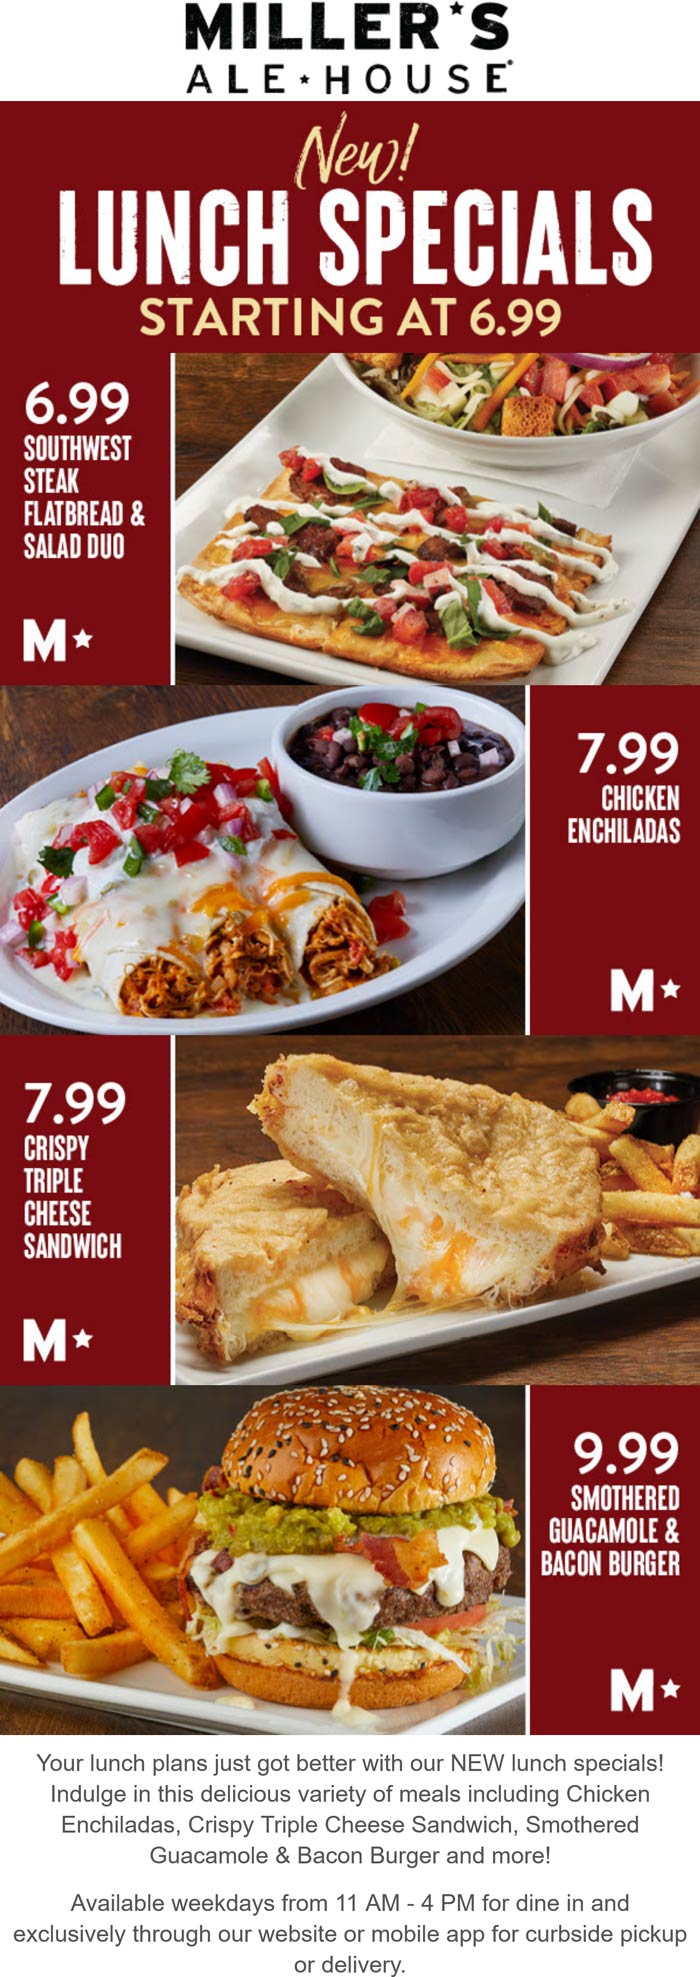 Millers Ale House restaurants Coupon  Lunch under $10 at Millers Ale House restaurants #millersalehouse 